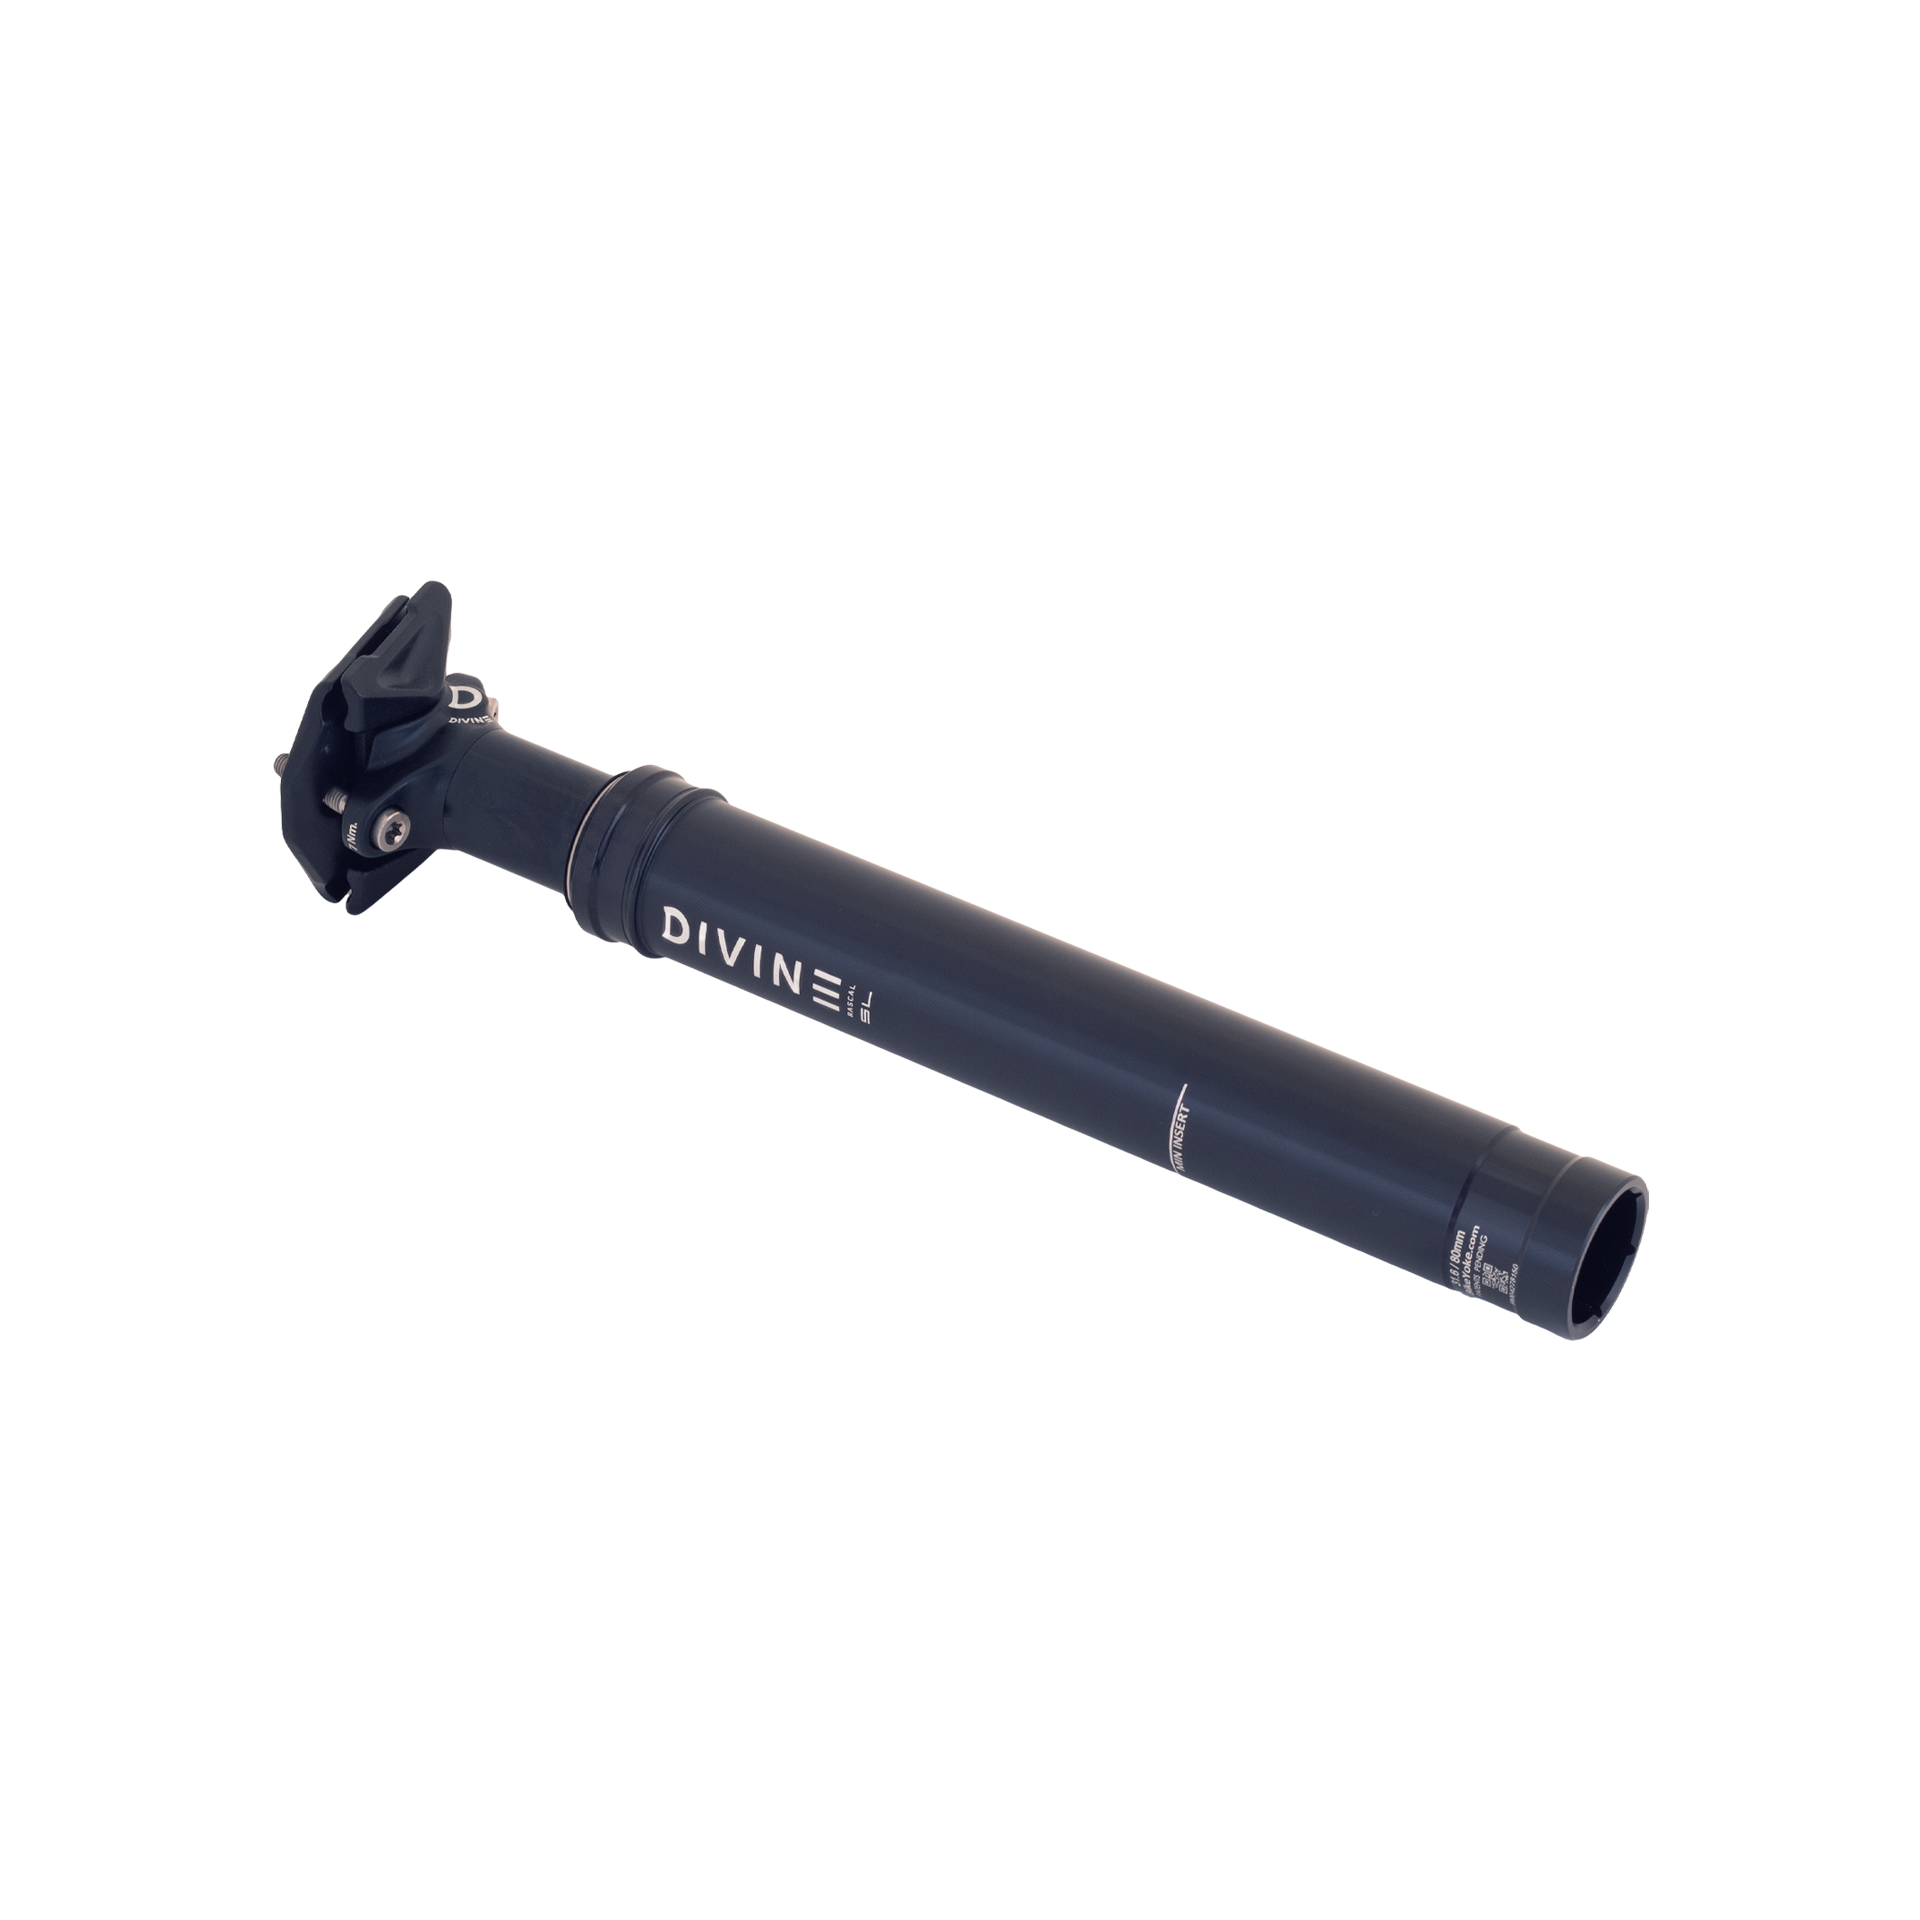 BikeYoke dropper seatposts stand for maximum performance and 